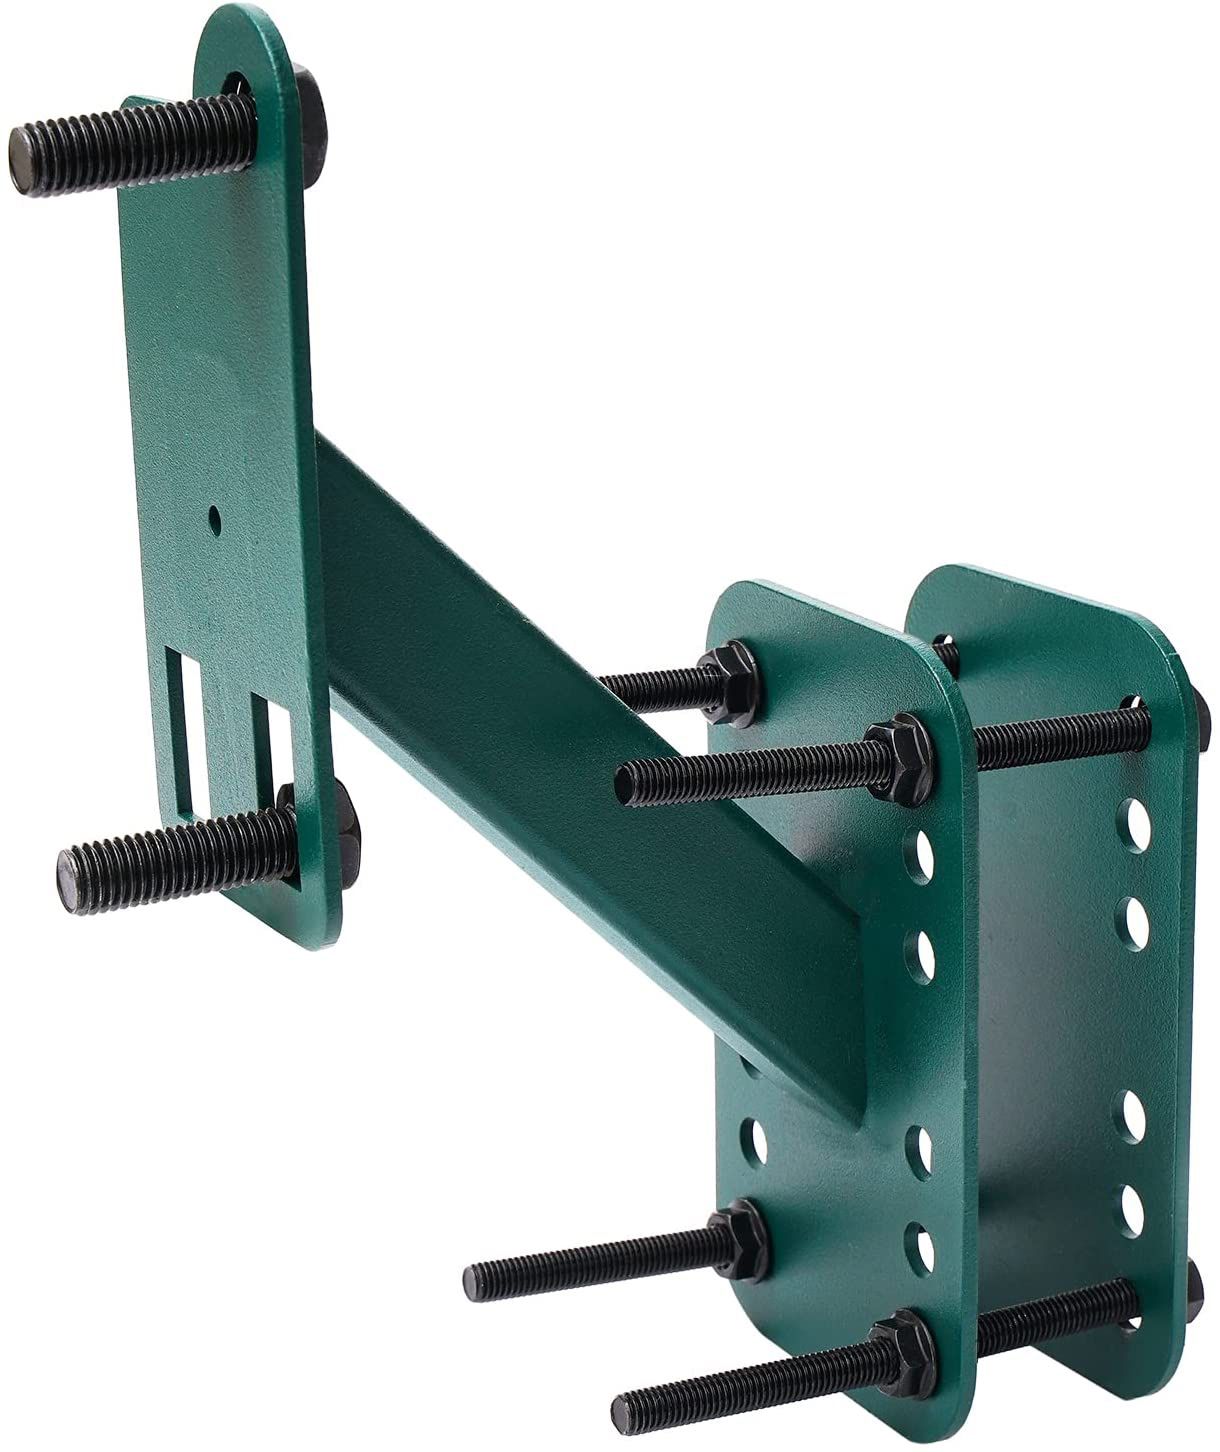 Trailer Spare Tire Mount | Spare Tire Carrier Powder Coat Steel Dark Green | Fits Most 4 & 5 & 6 Lugs Wheels on 4", 4.5'', 4.75'', 5" or 5.5" Bolt Pat